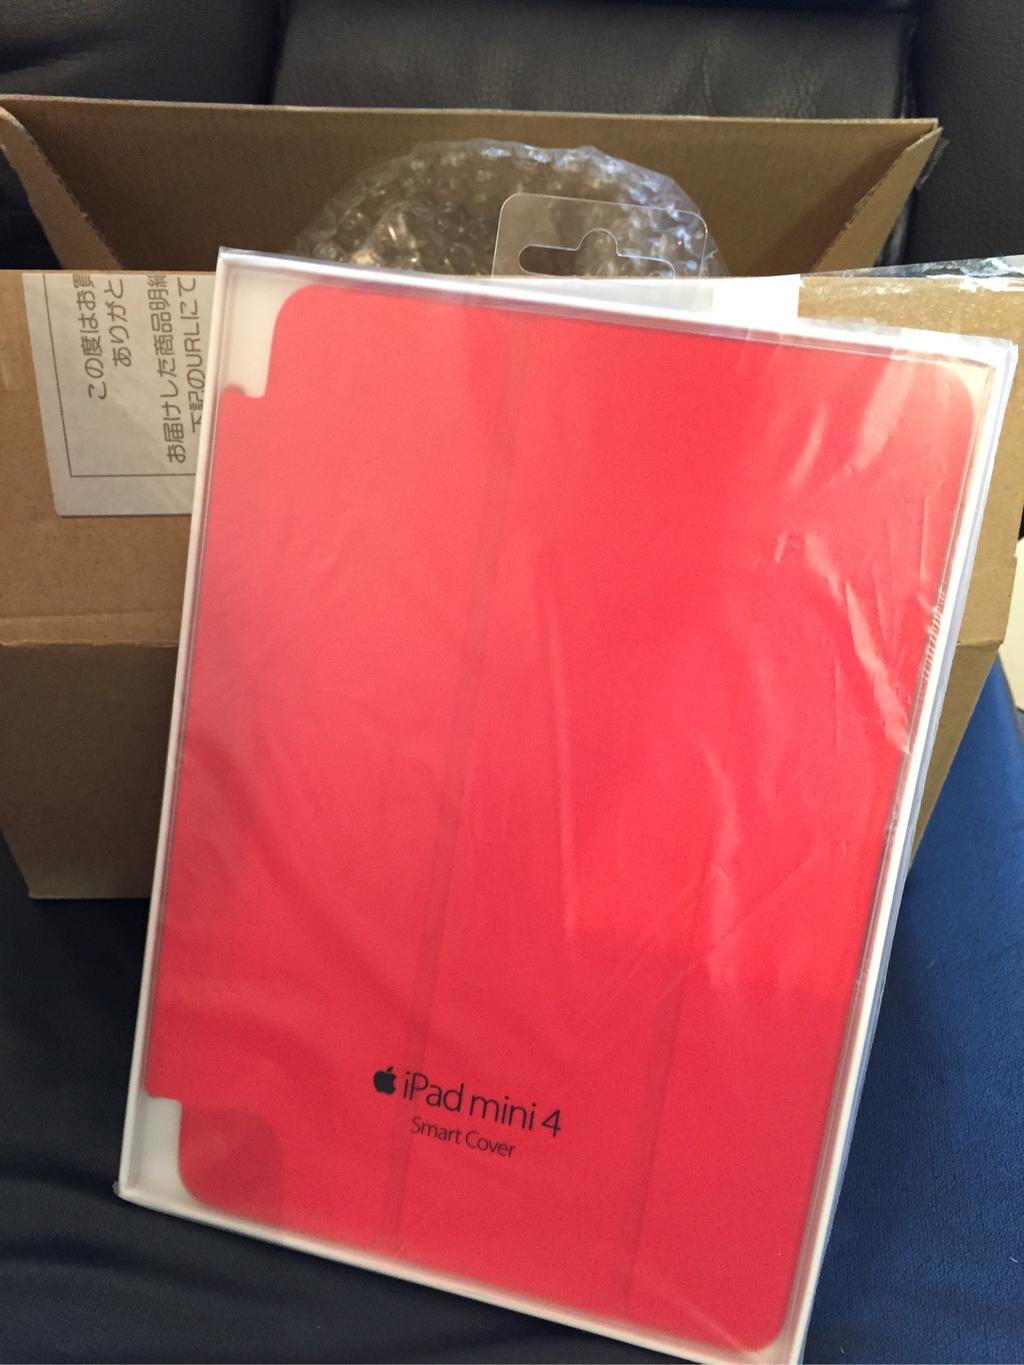 iPad mini 4 Smart Cover Red MKLY2FE/A (PRODUCT)RED